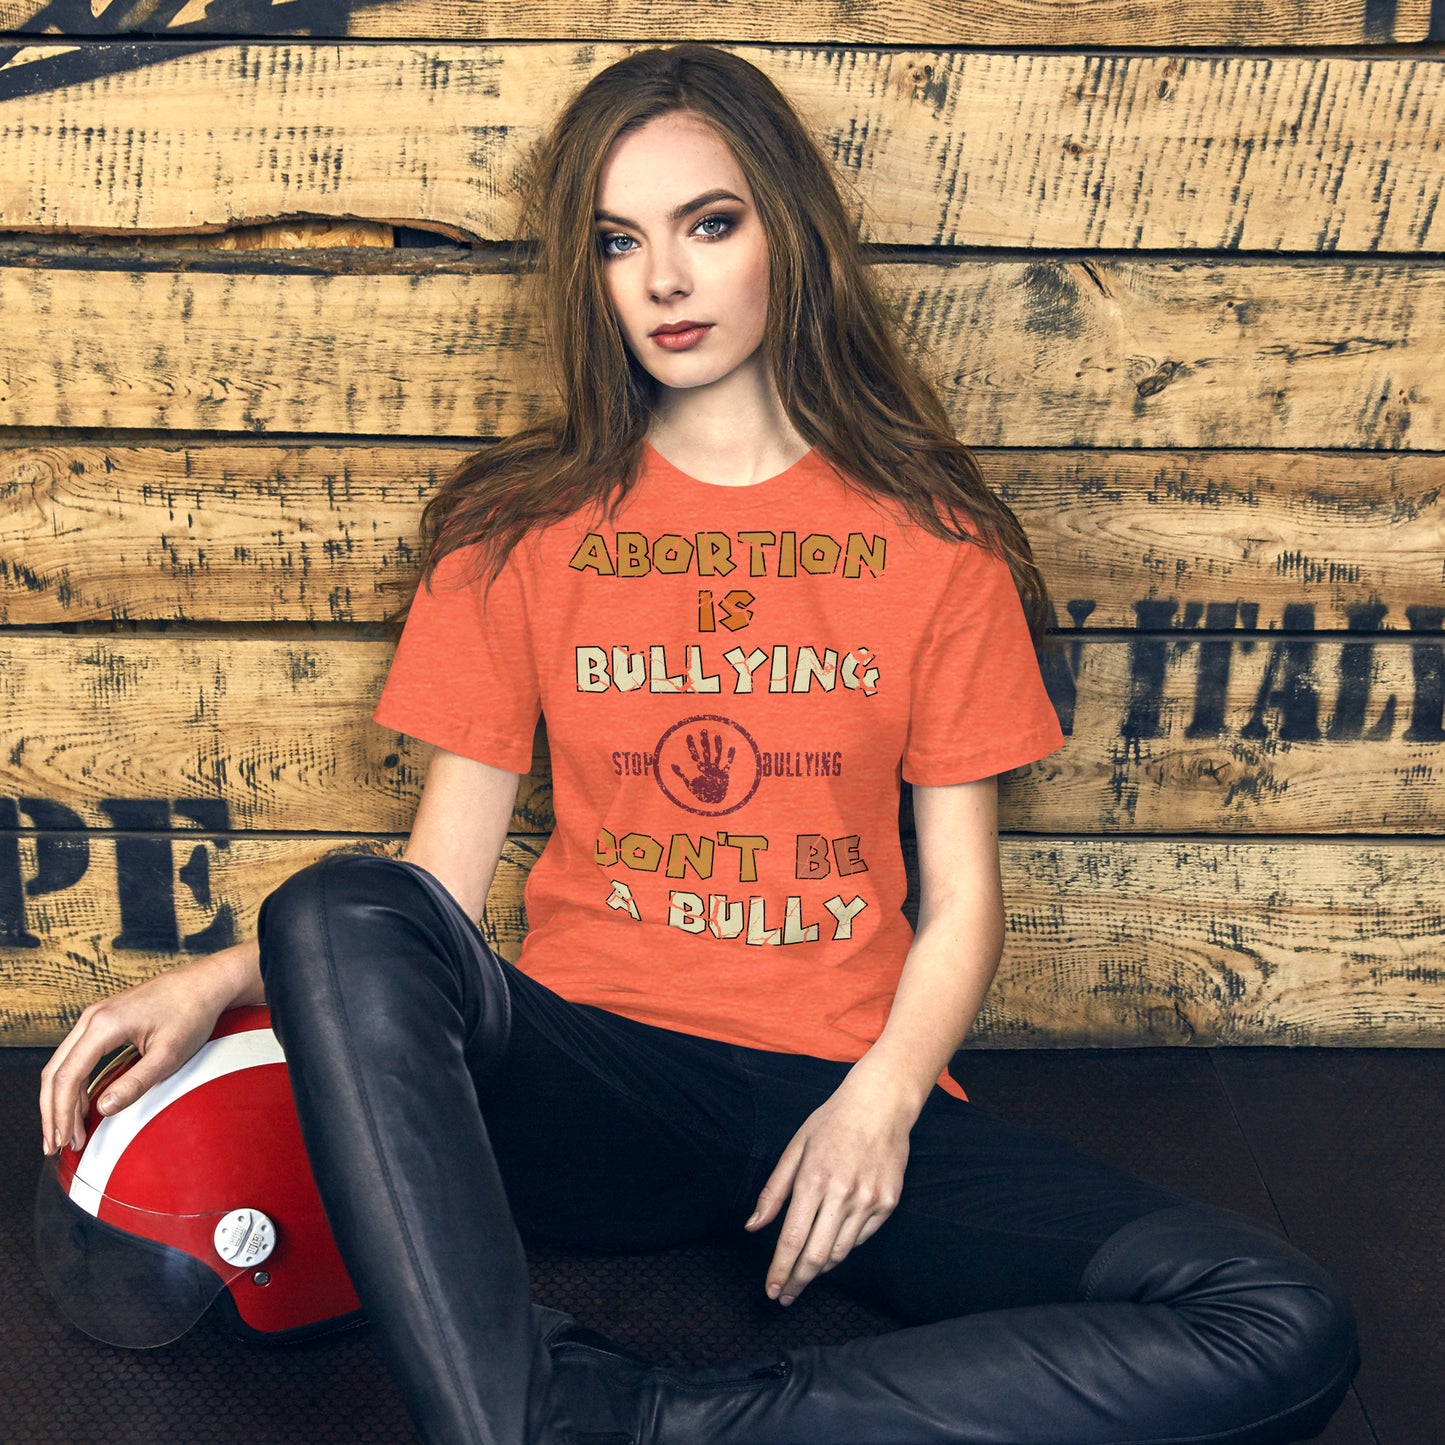 A001 T-shirt - Bella + Canvas 3001 Unisex T-shirt Featuring Stop-Hand Graphic with text “Abortion is Bullying. Don’t be a Bully.”